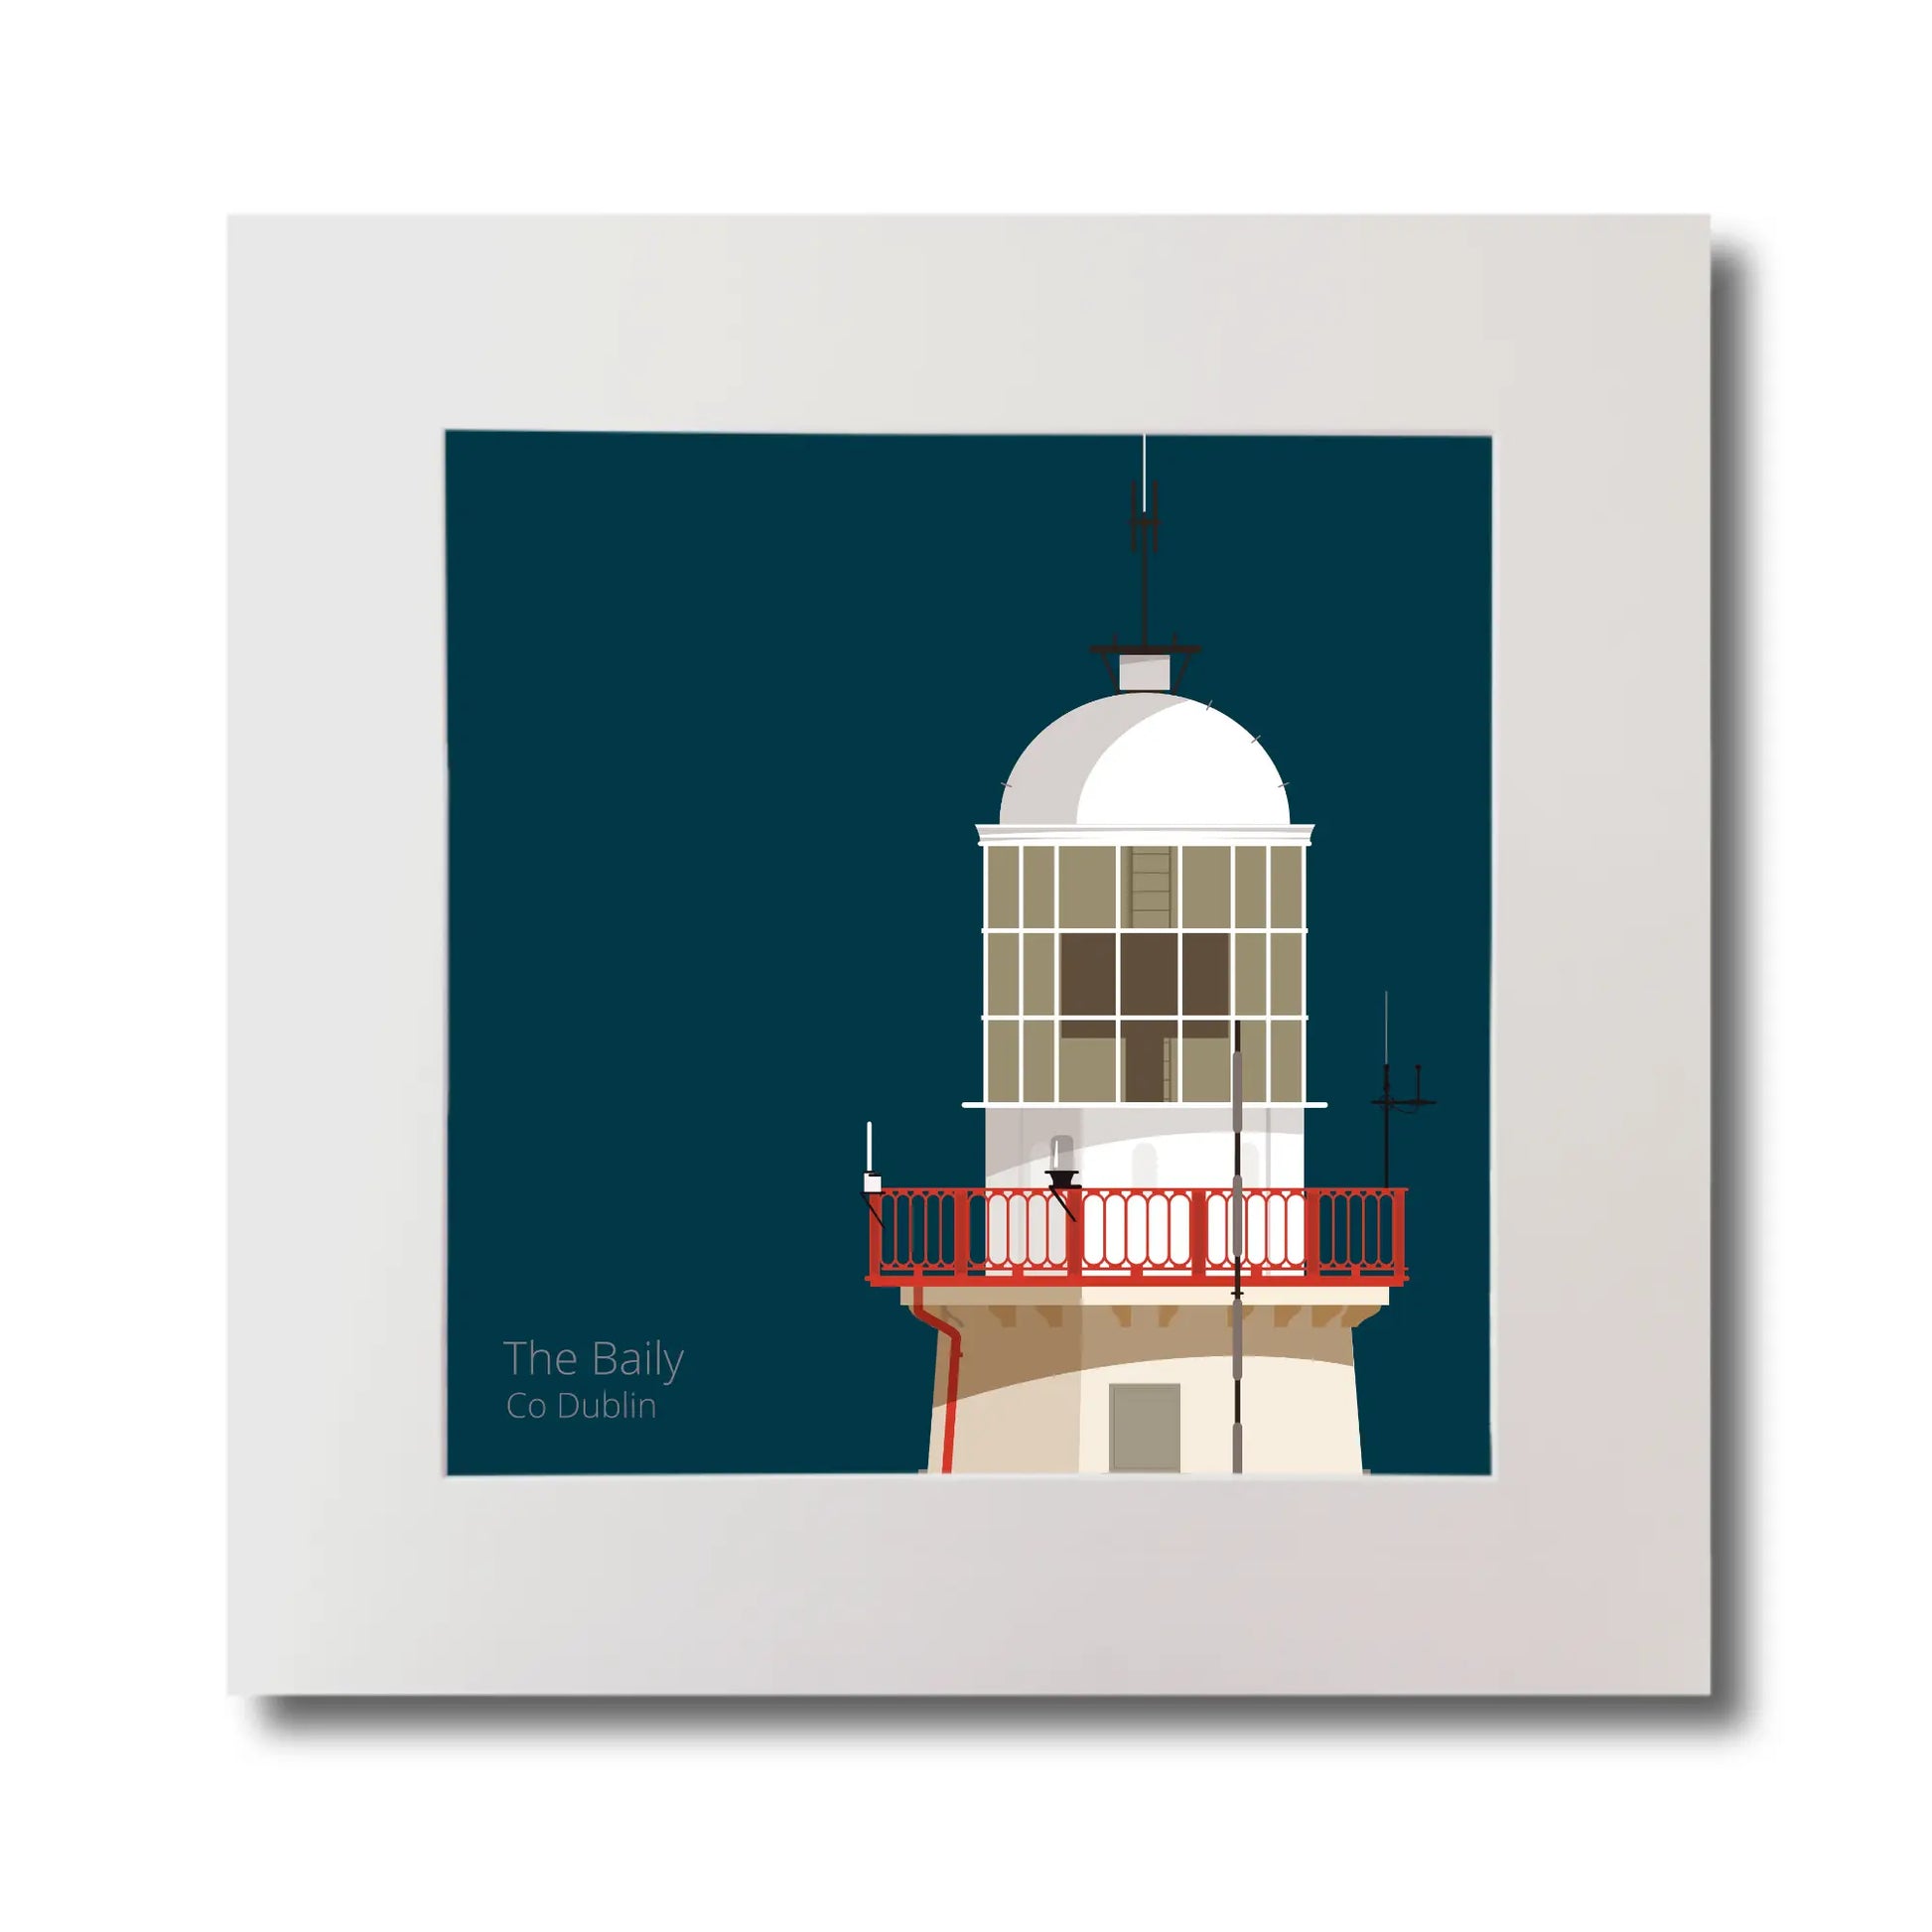 Illustration of The Baily lighthouse on a midnight blue background, mounted and measuring 30x30cm.